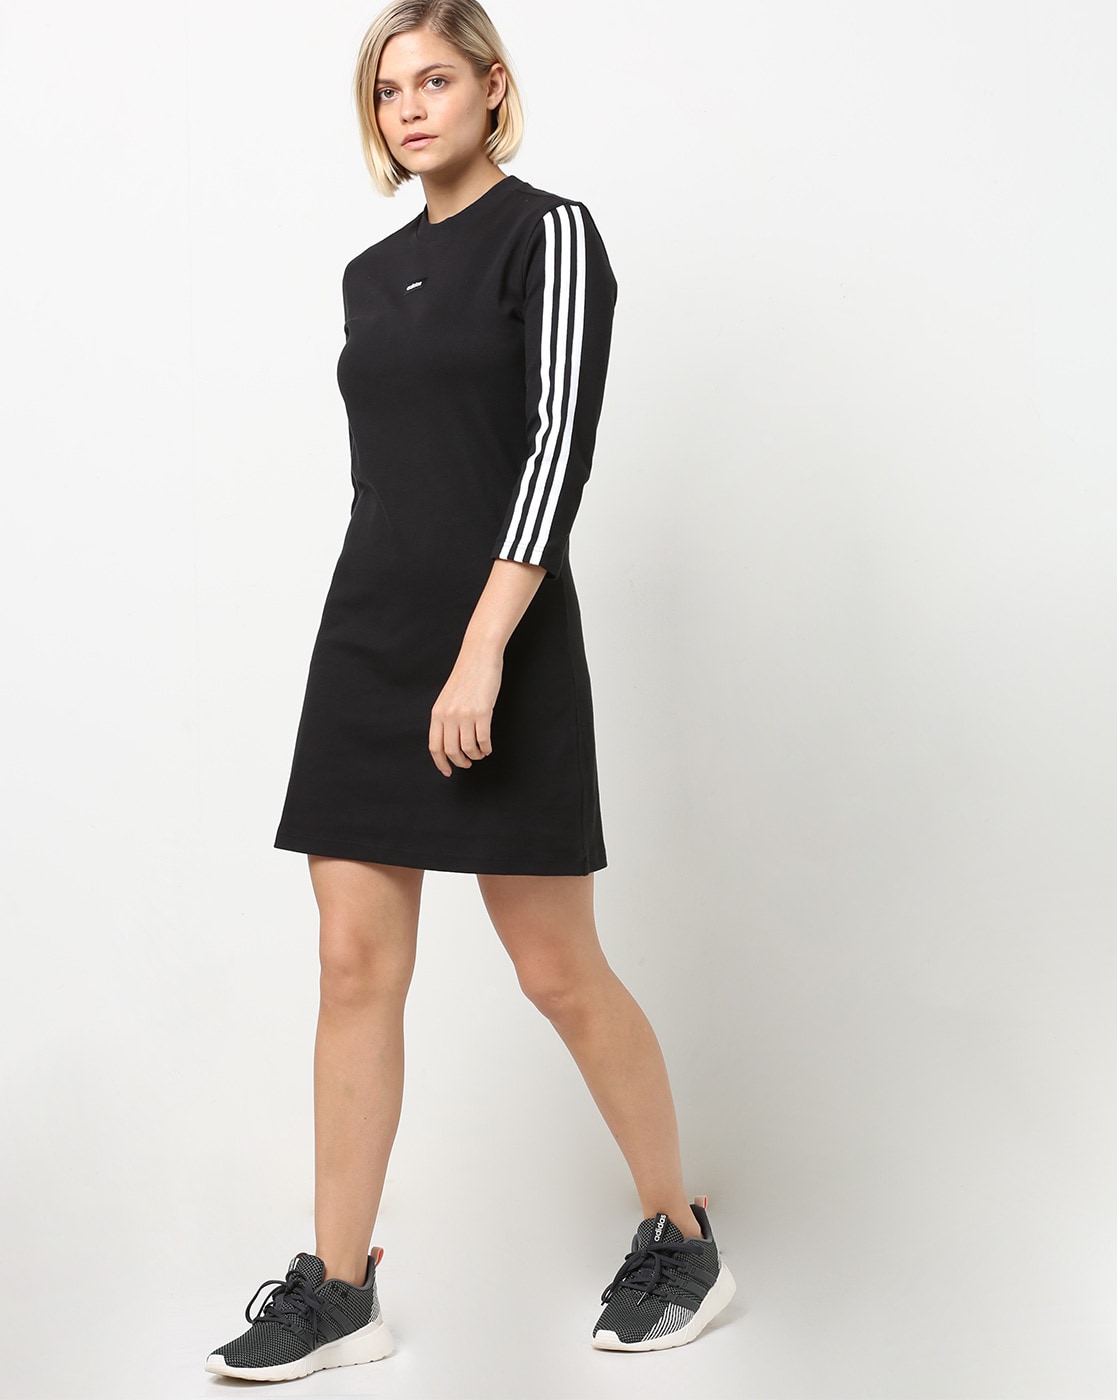 Buy Black Dresses for Women by ADIDAS ...